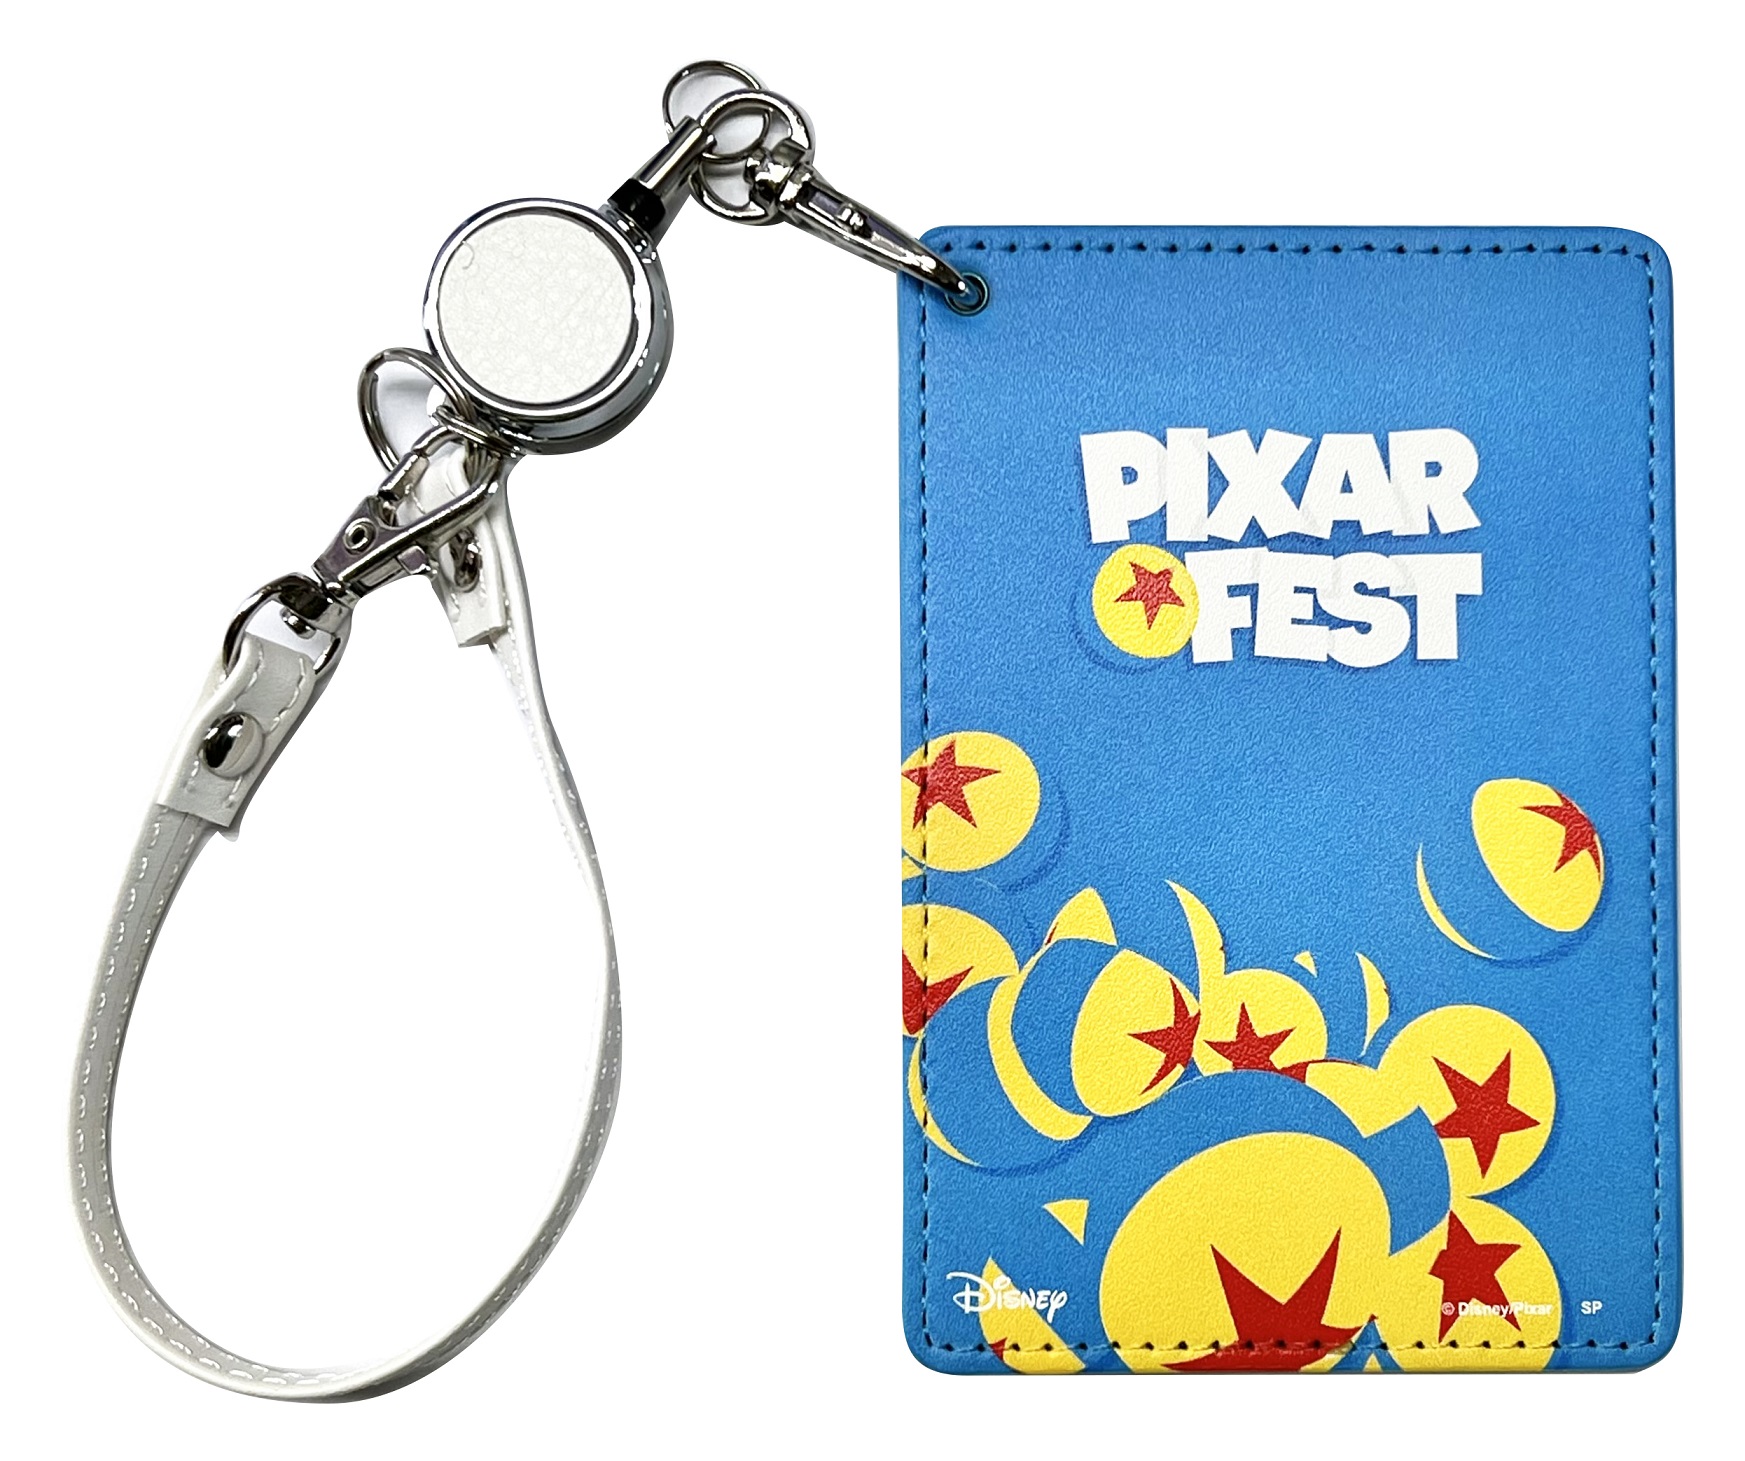 pixar-fest-pop-up-store-by-small-planet3-3